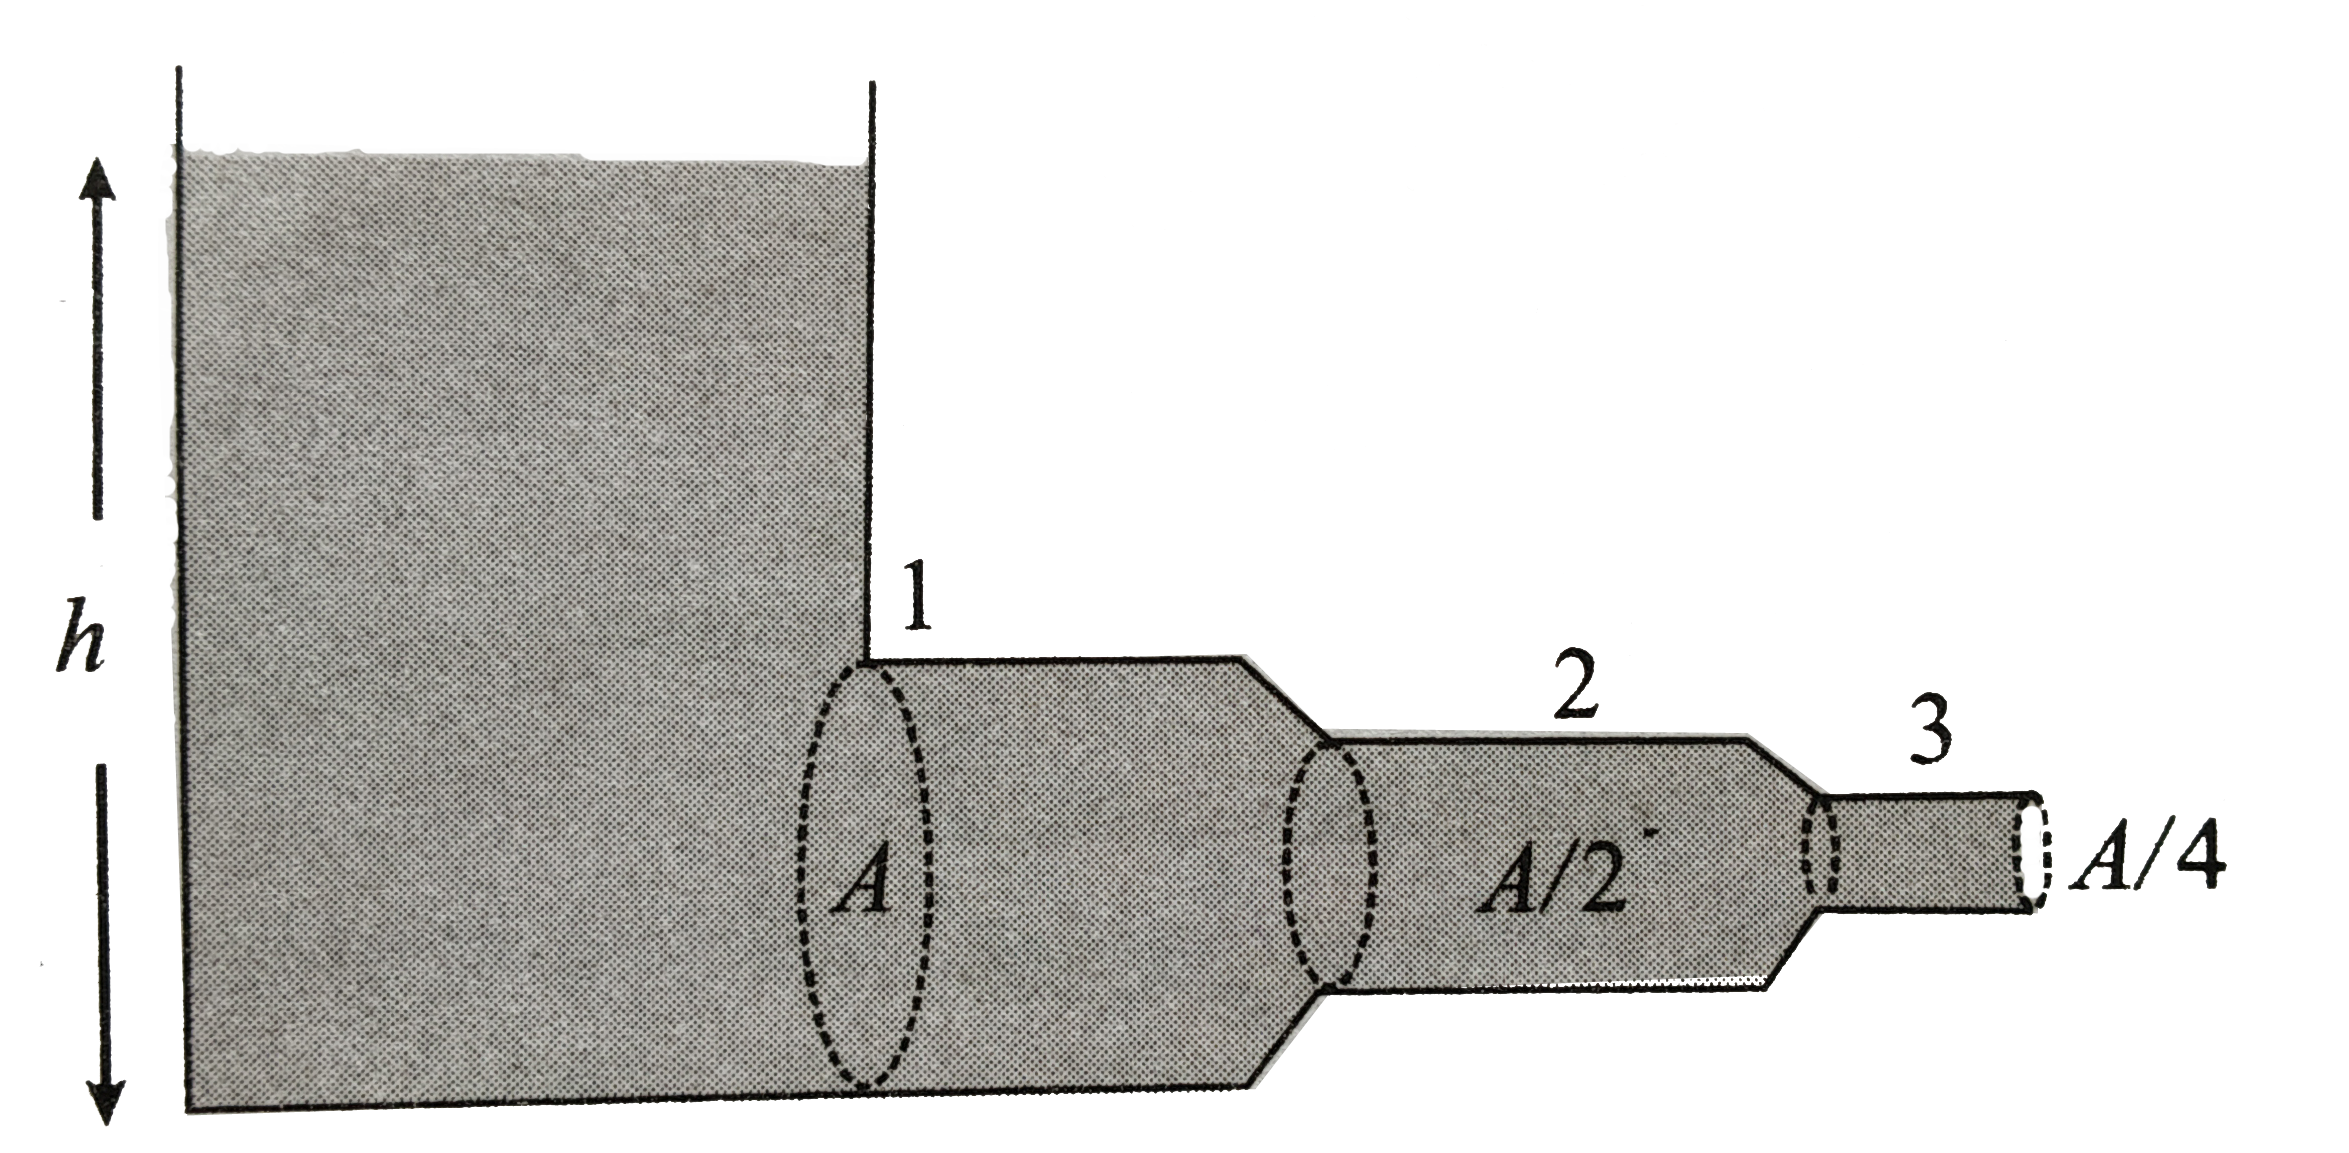 In the figure shown the velocity and pressure of the liquid at the cross section (2) are given by (If P(0) is the atmospheric pressure).